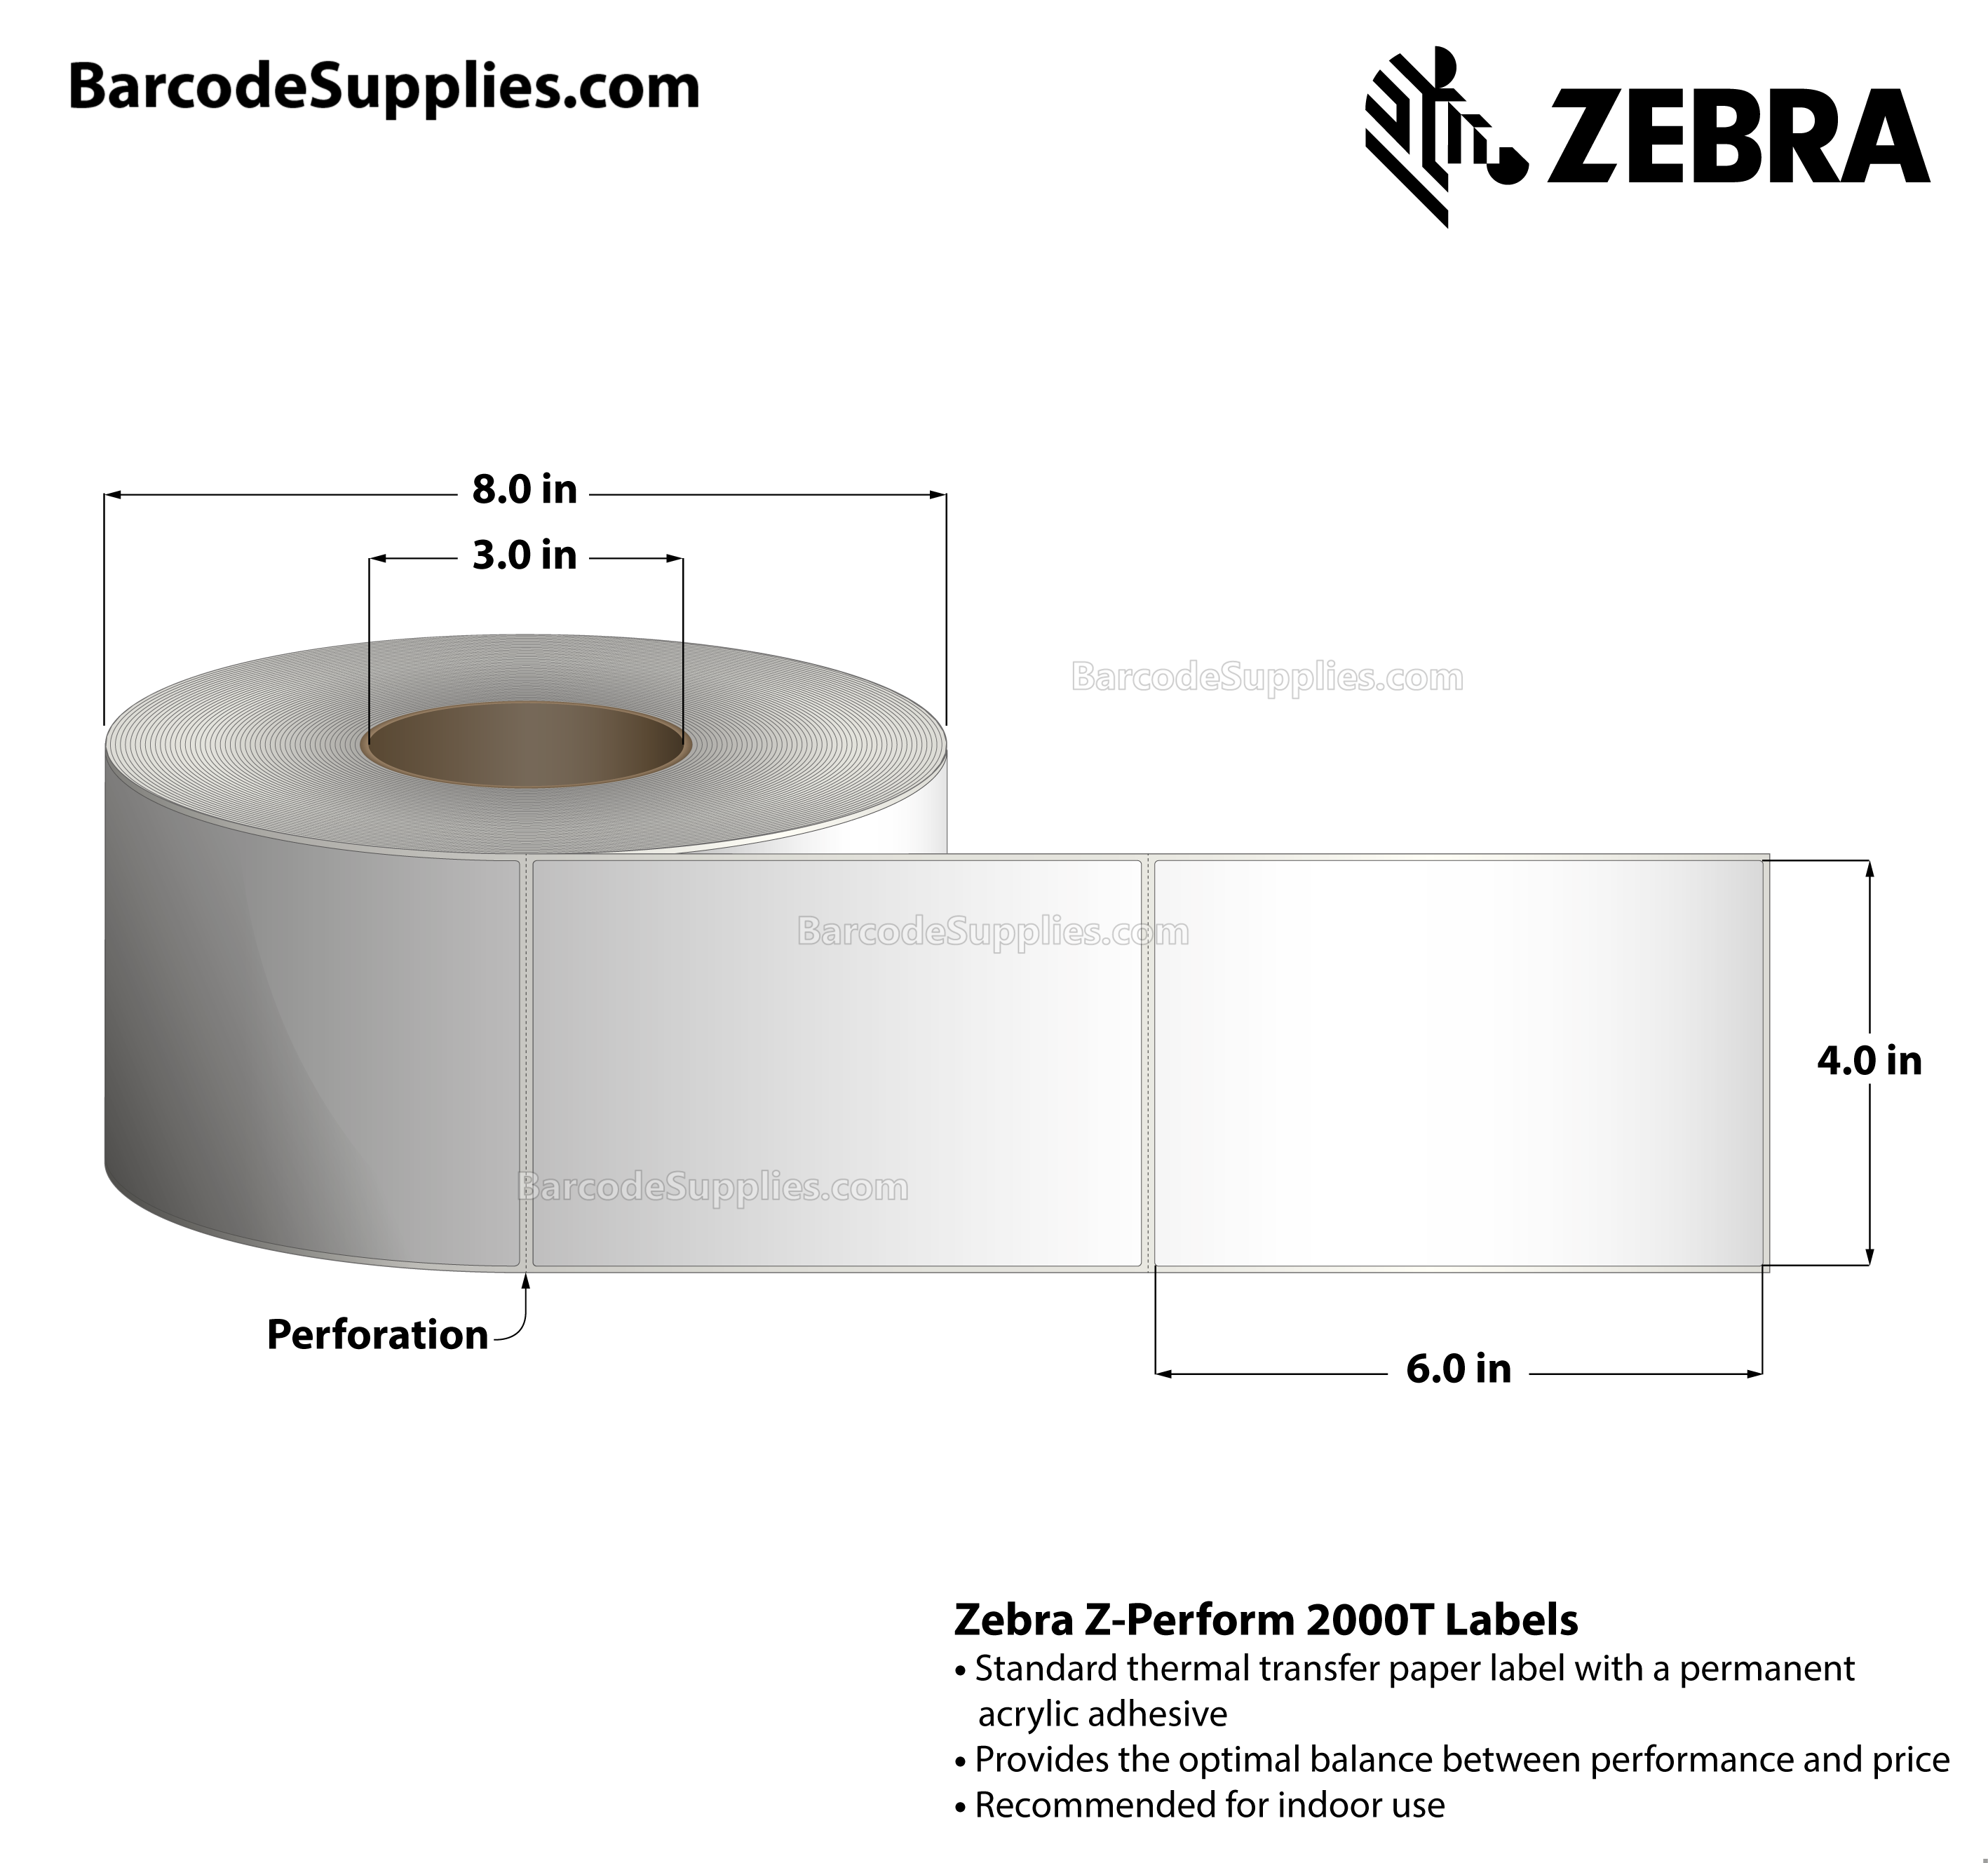 4 x 6 Thermal Transfer White Z-Perform 2000T All-Temp Labels With All-Temp Adhesive - Perforated - 950 Labels Per Roll - Carton Of 4 Rolls - 3800 Labels Total - MPN: 72376